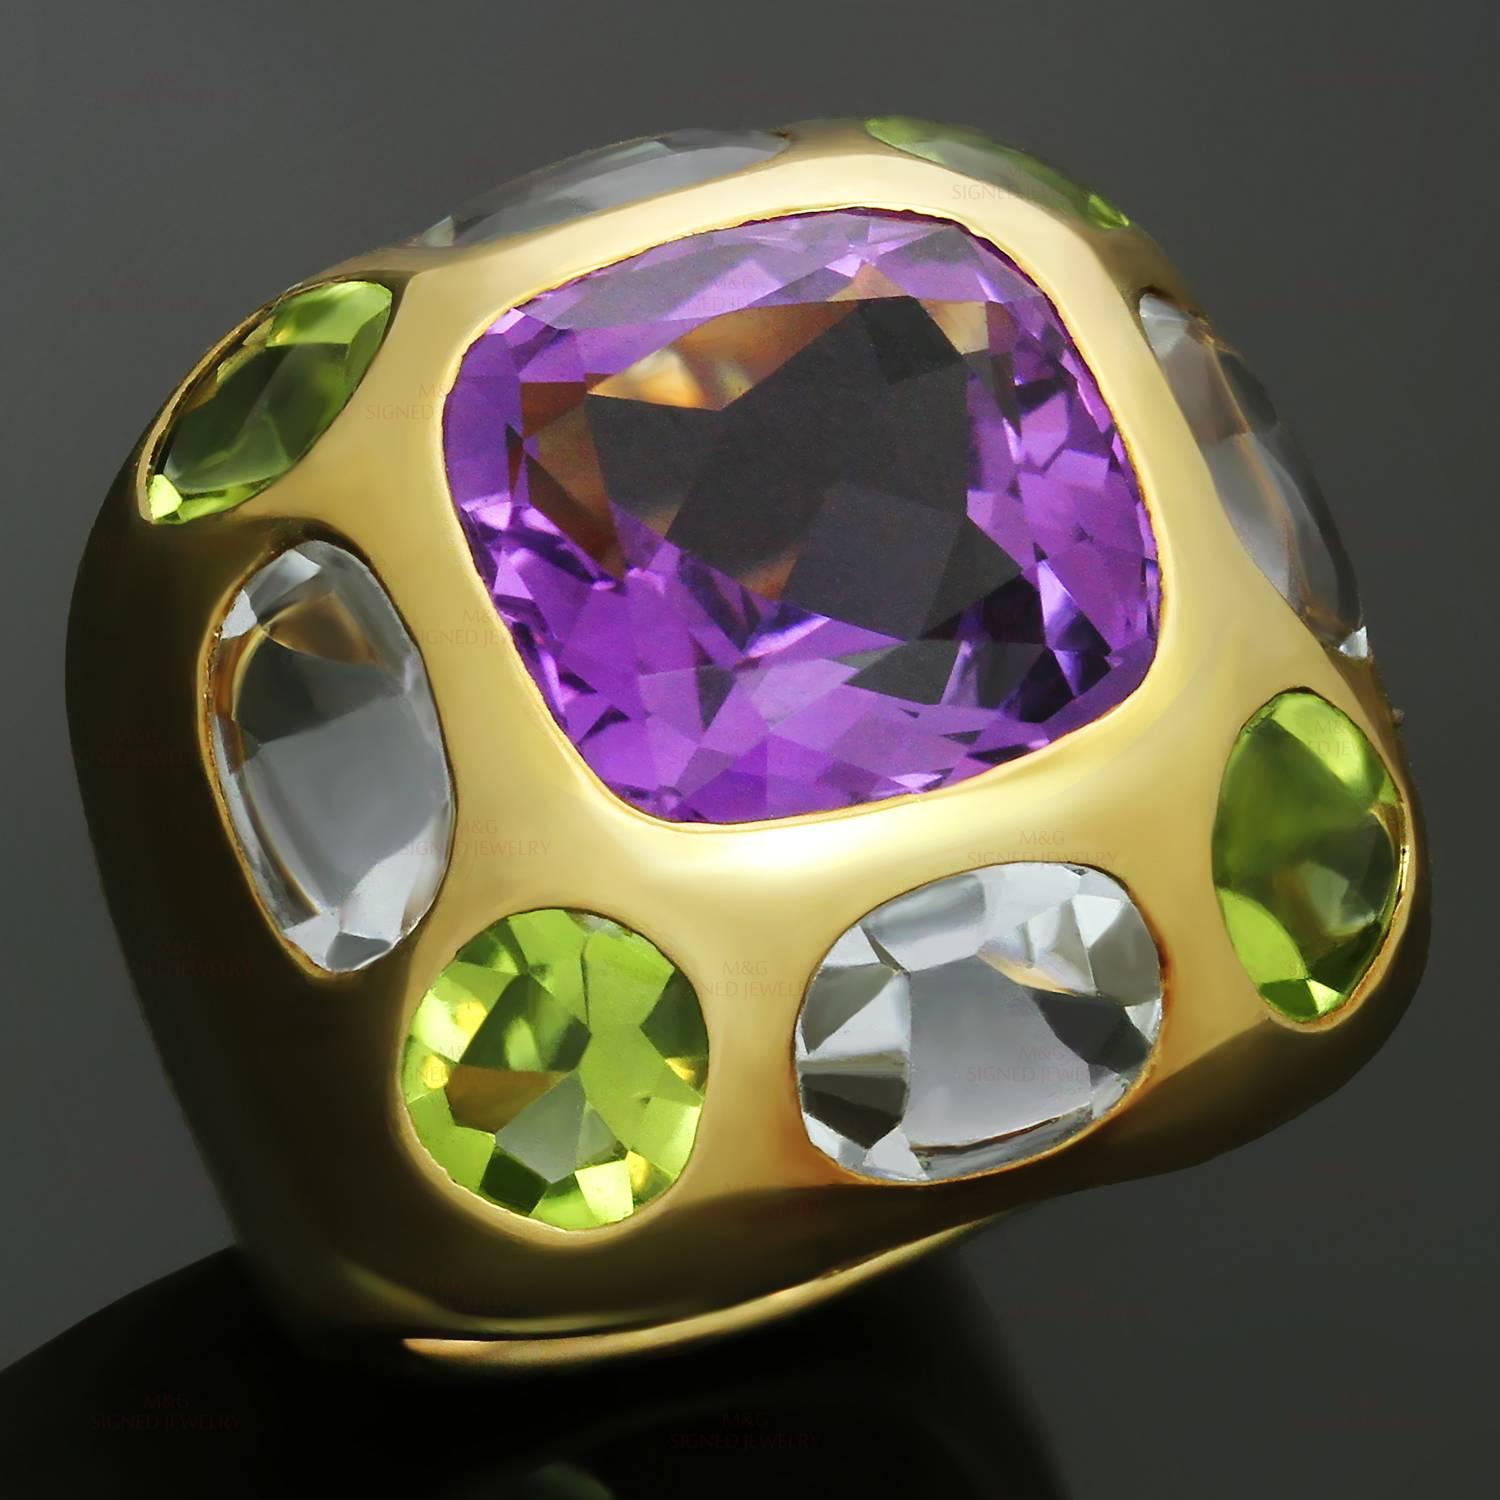 This chic Chanel dome ring from the vibrant Baroque collection is crafted in 18k yellow gold and features a faceted amethyst in the center surrounded by 4 oval peridots and 4 oval aquamarines. Made in France circa 2010s. Measurements: 0.78